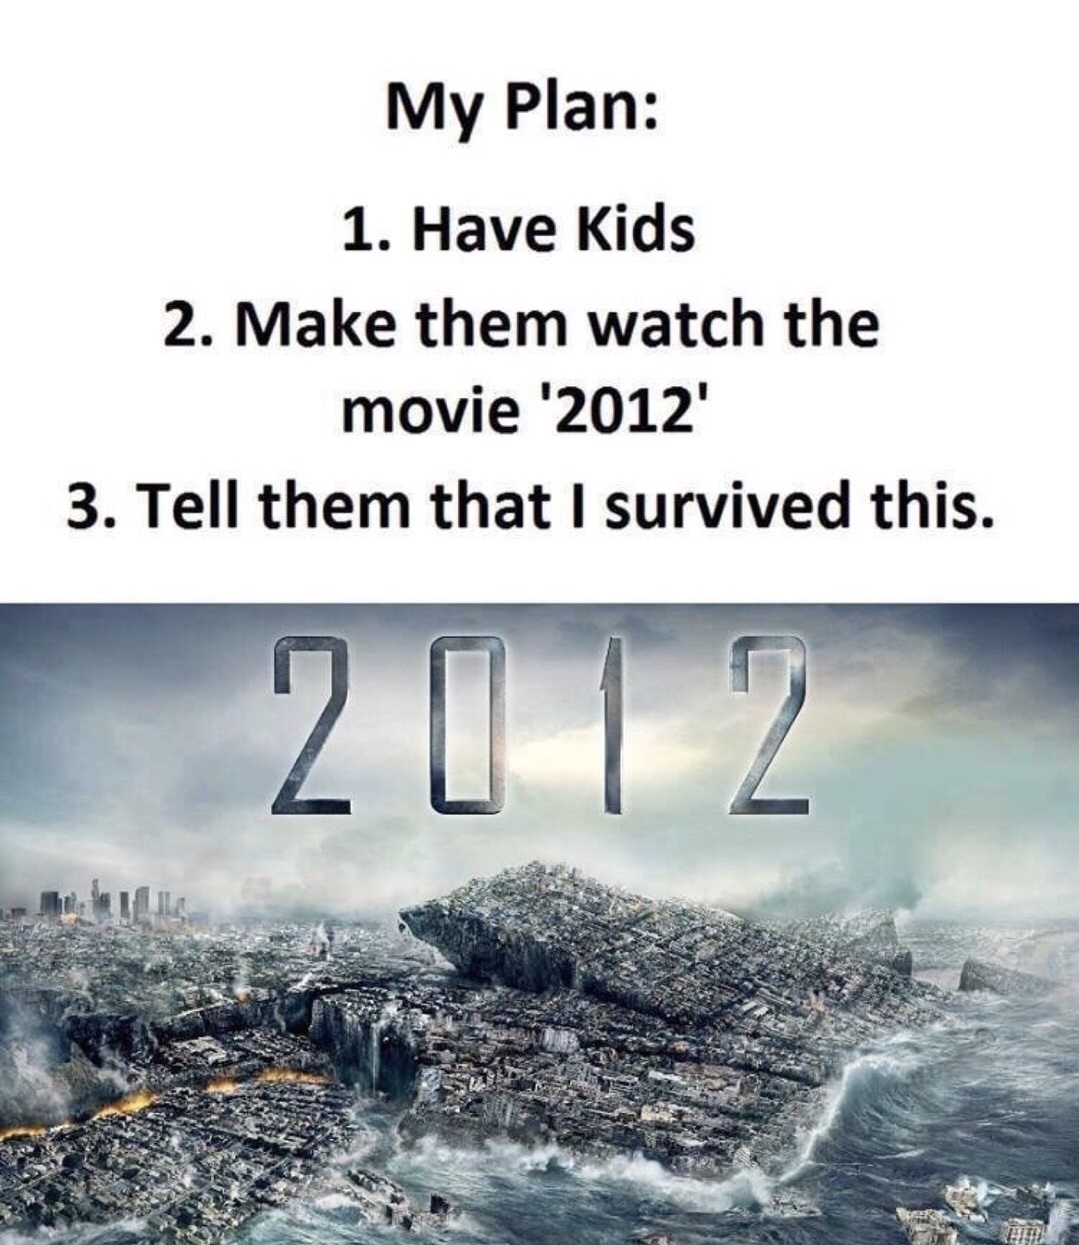 Meme about having kids, taking them to see 2012, then telling them you survived it